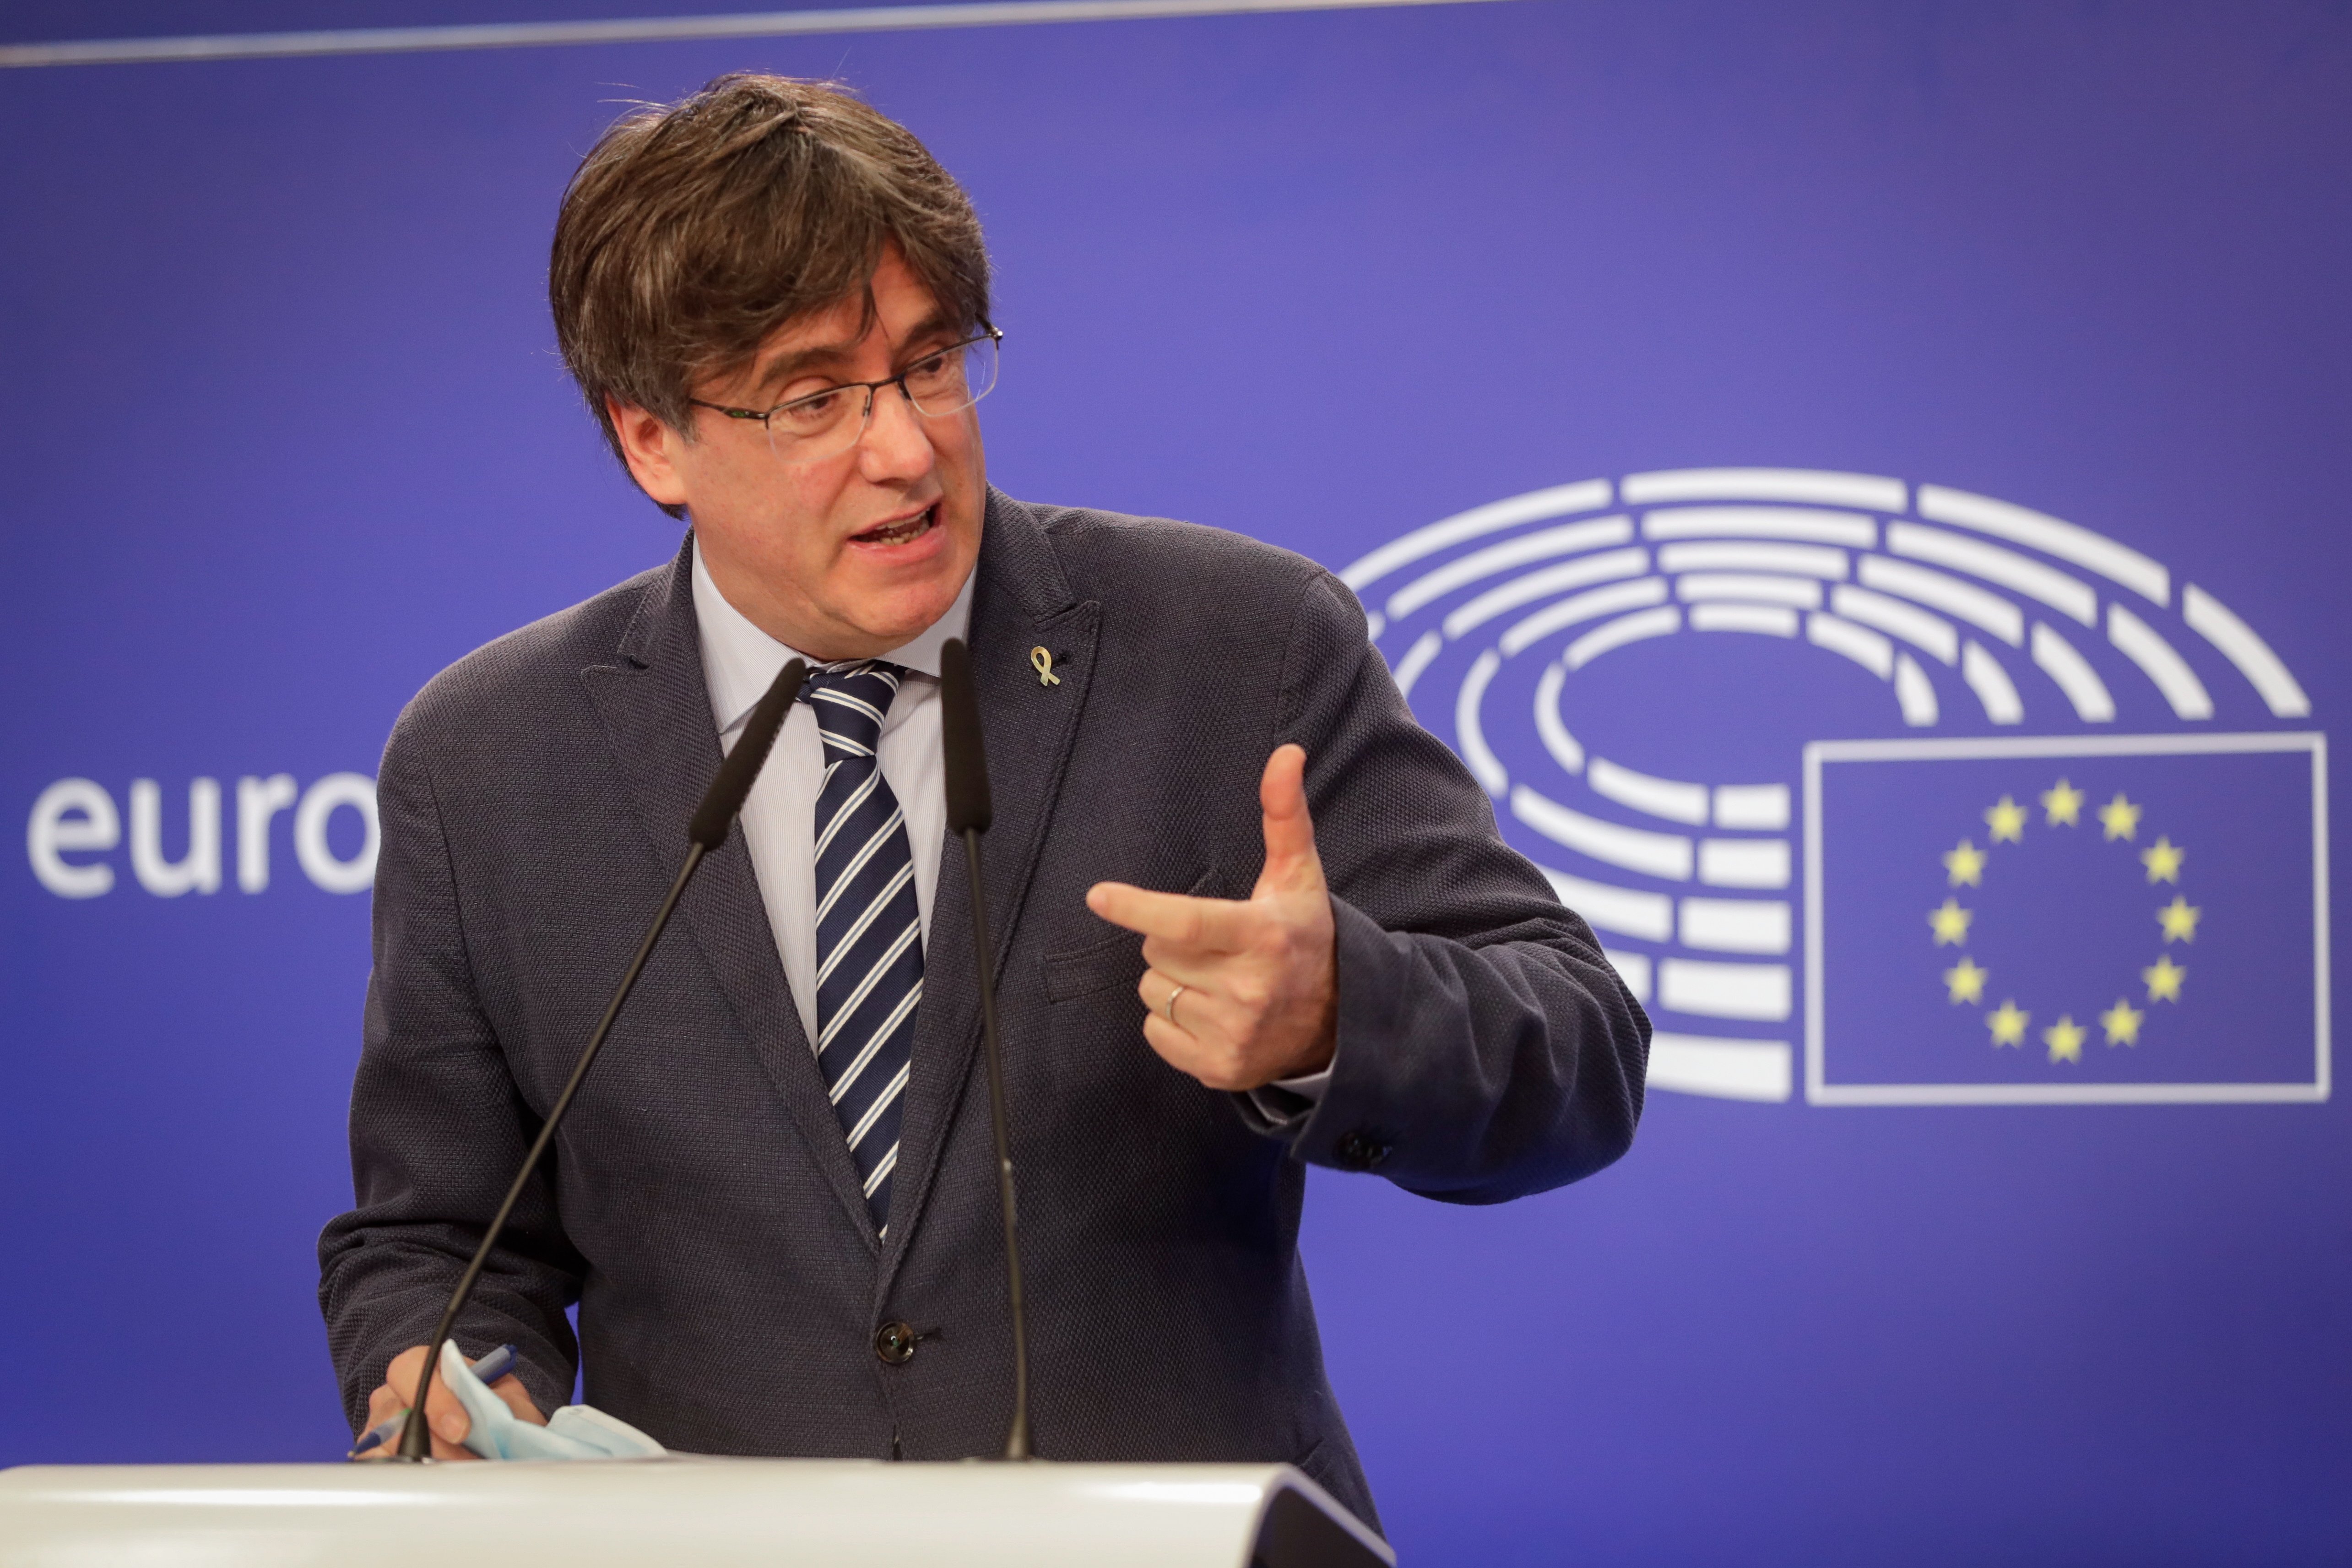 Puigdemont dismisses claimed Russian links to independence: "Spain's dirty war"